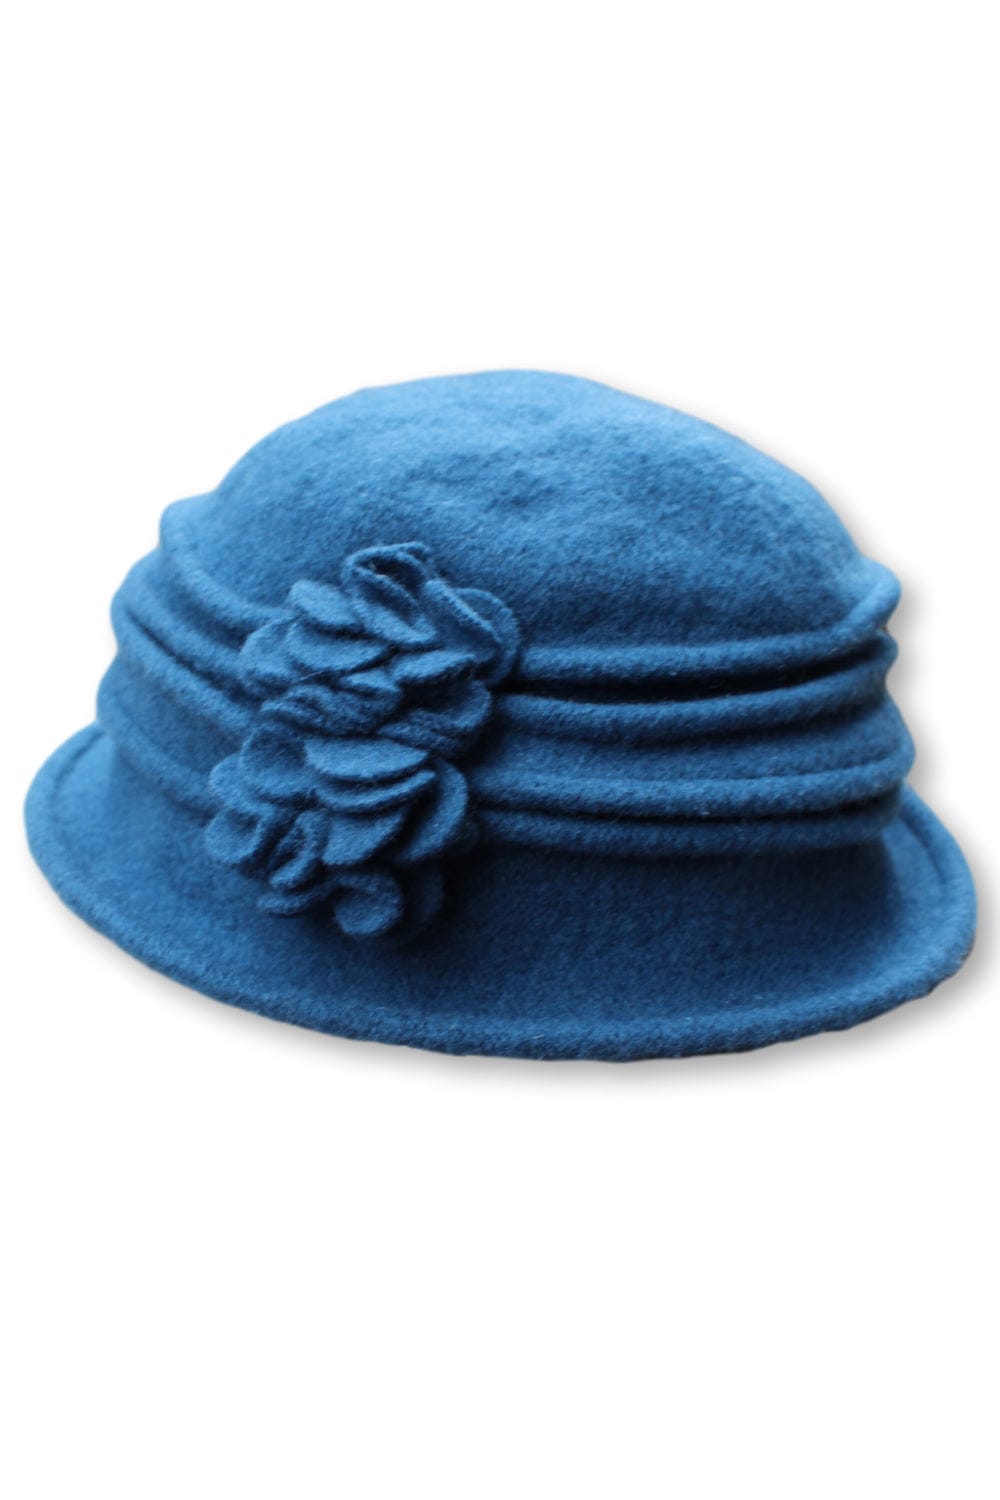 Womens Merino Wool hat with pleat detail and 2 side flowers. The hat is a blue color.